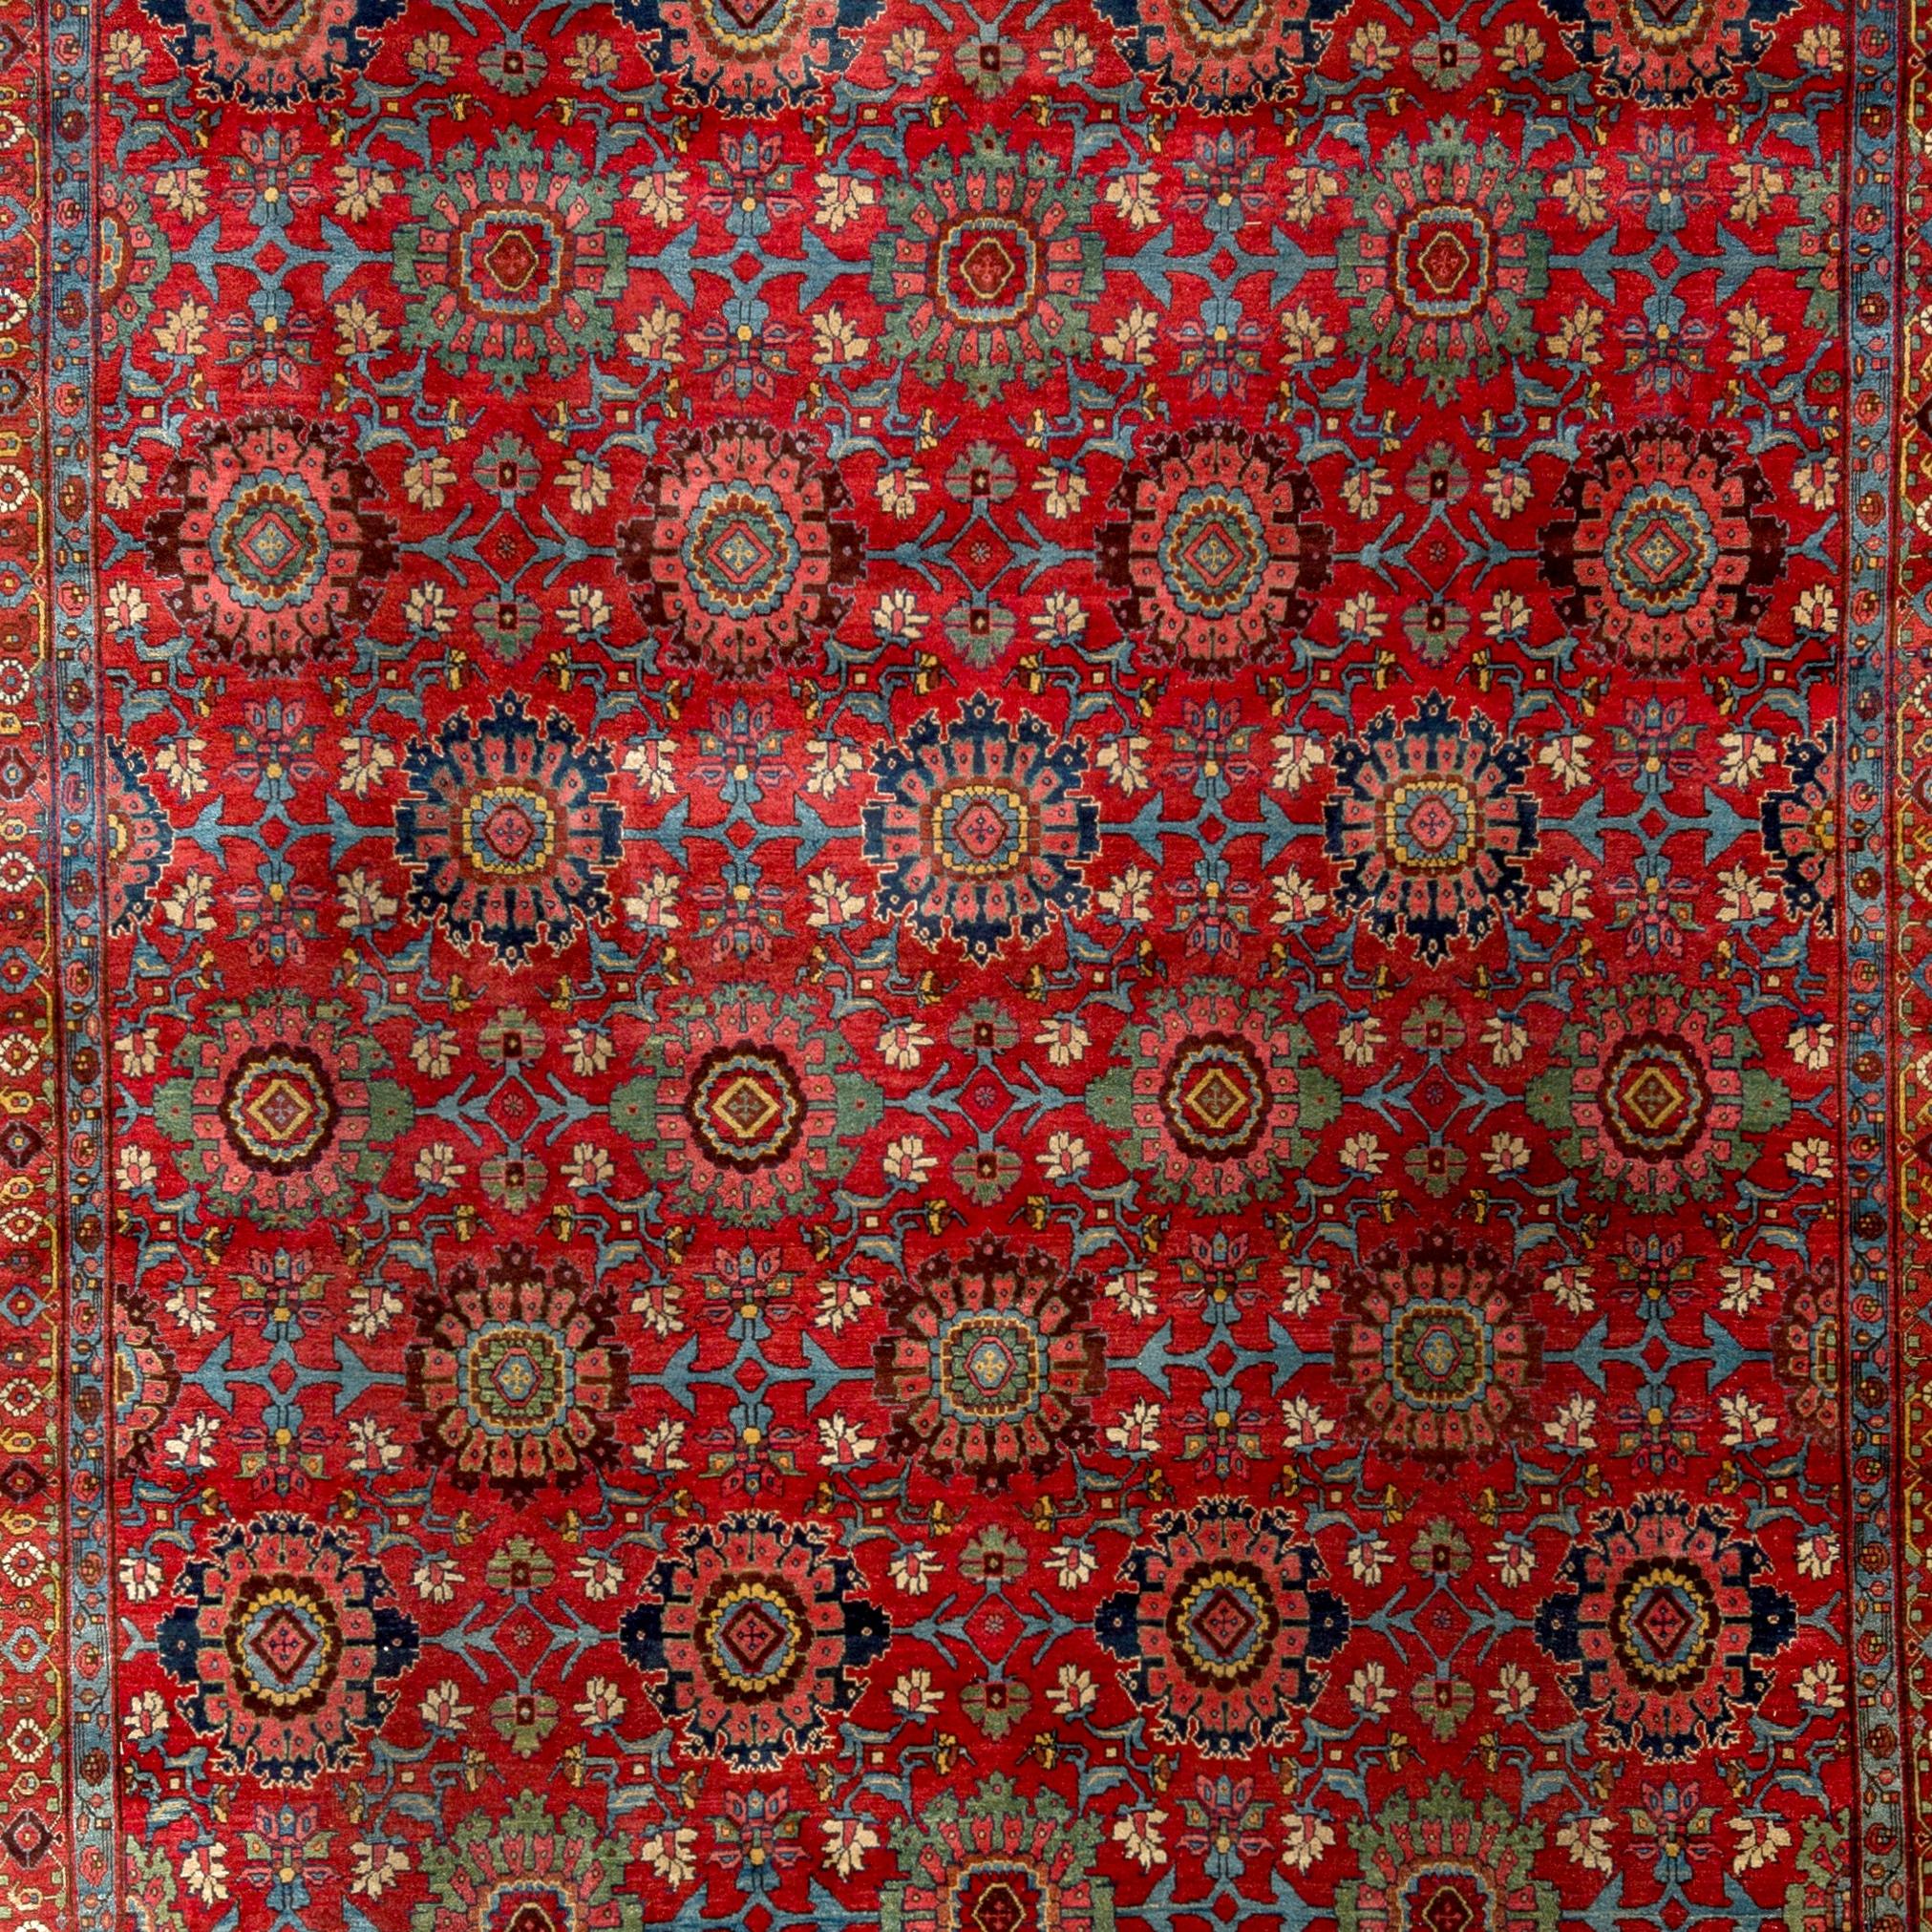 There is a certain element of cheerfulness as well as a powerful presence to this dazzling Bidjar rug with its softly rendered blossoms all-over a strikingly vivid red field. These blossoms, big and small, featured in beautifully restrained soft